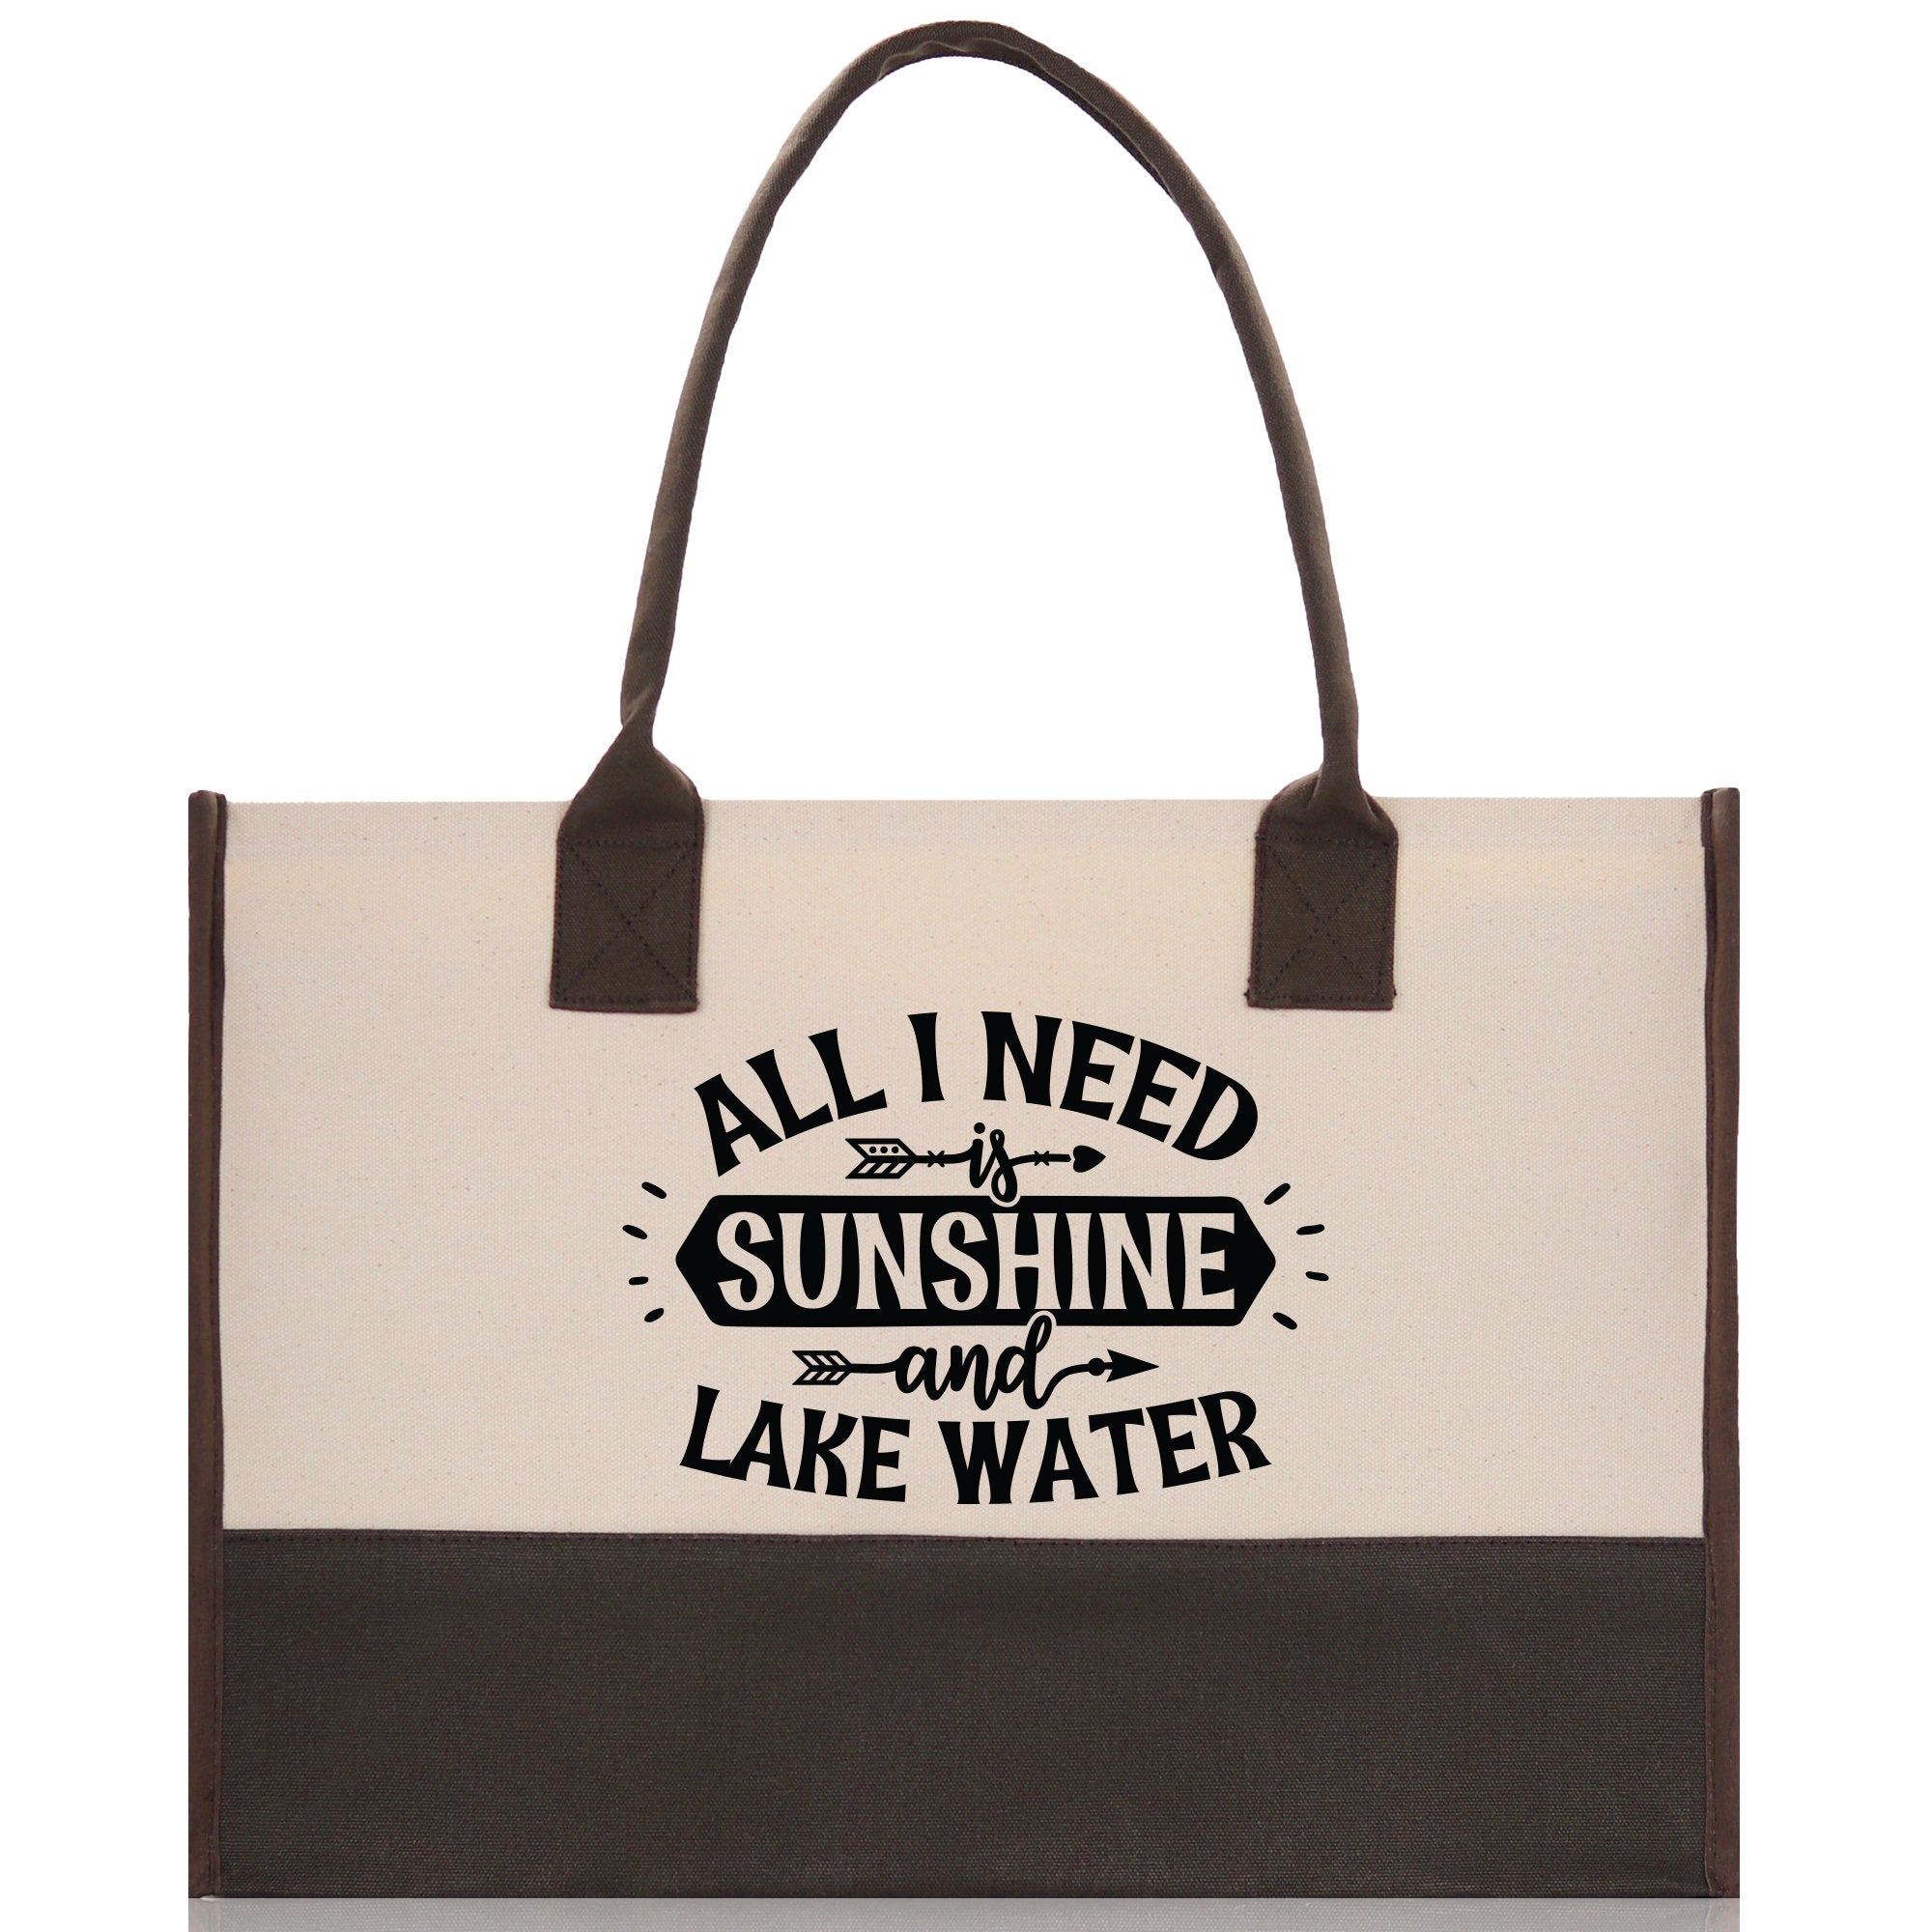 All I Need Sunshine and Lake Water Cotton Canvas Chic Tote Bag Camping Tote Lake Lover Gift Tote Bag Outdoor Tote Weekender Tote Laker Tote